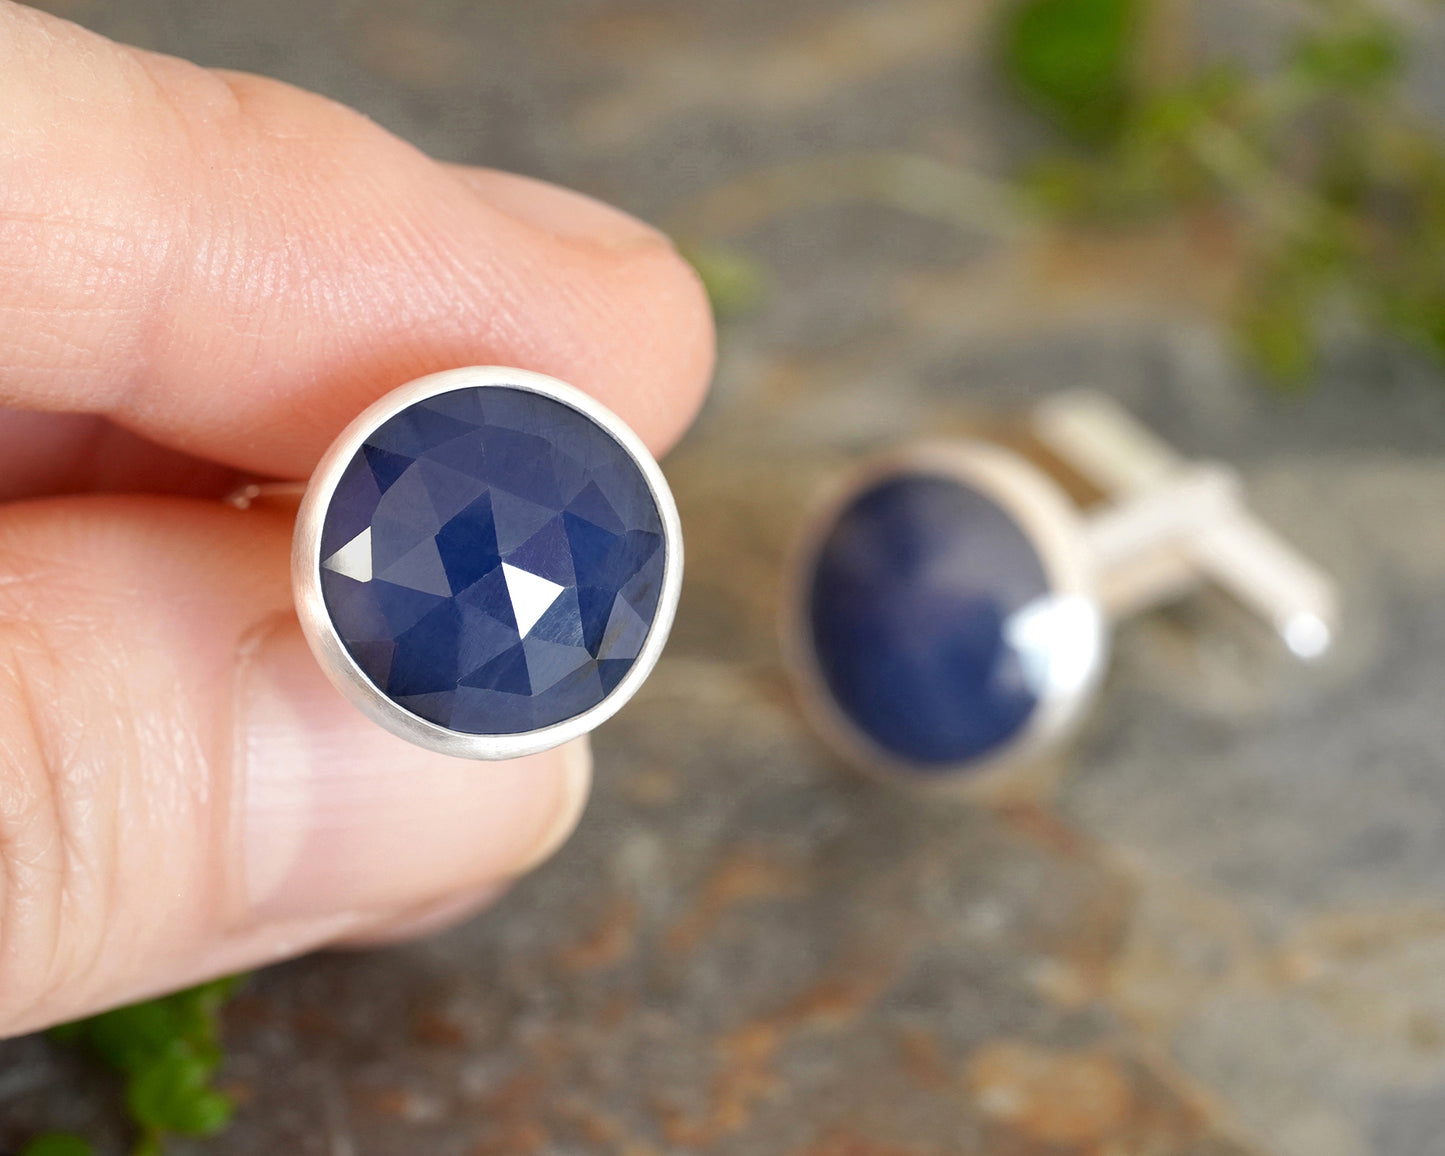 7.5ct Natural Sapphire Cufflinks in Solid Silver